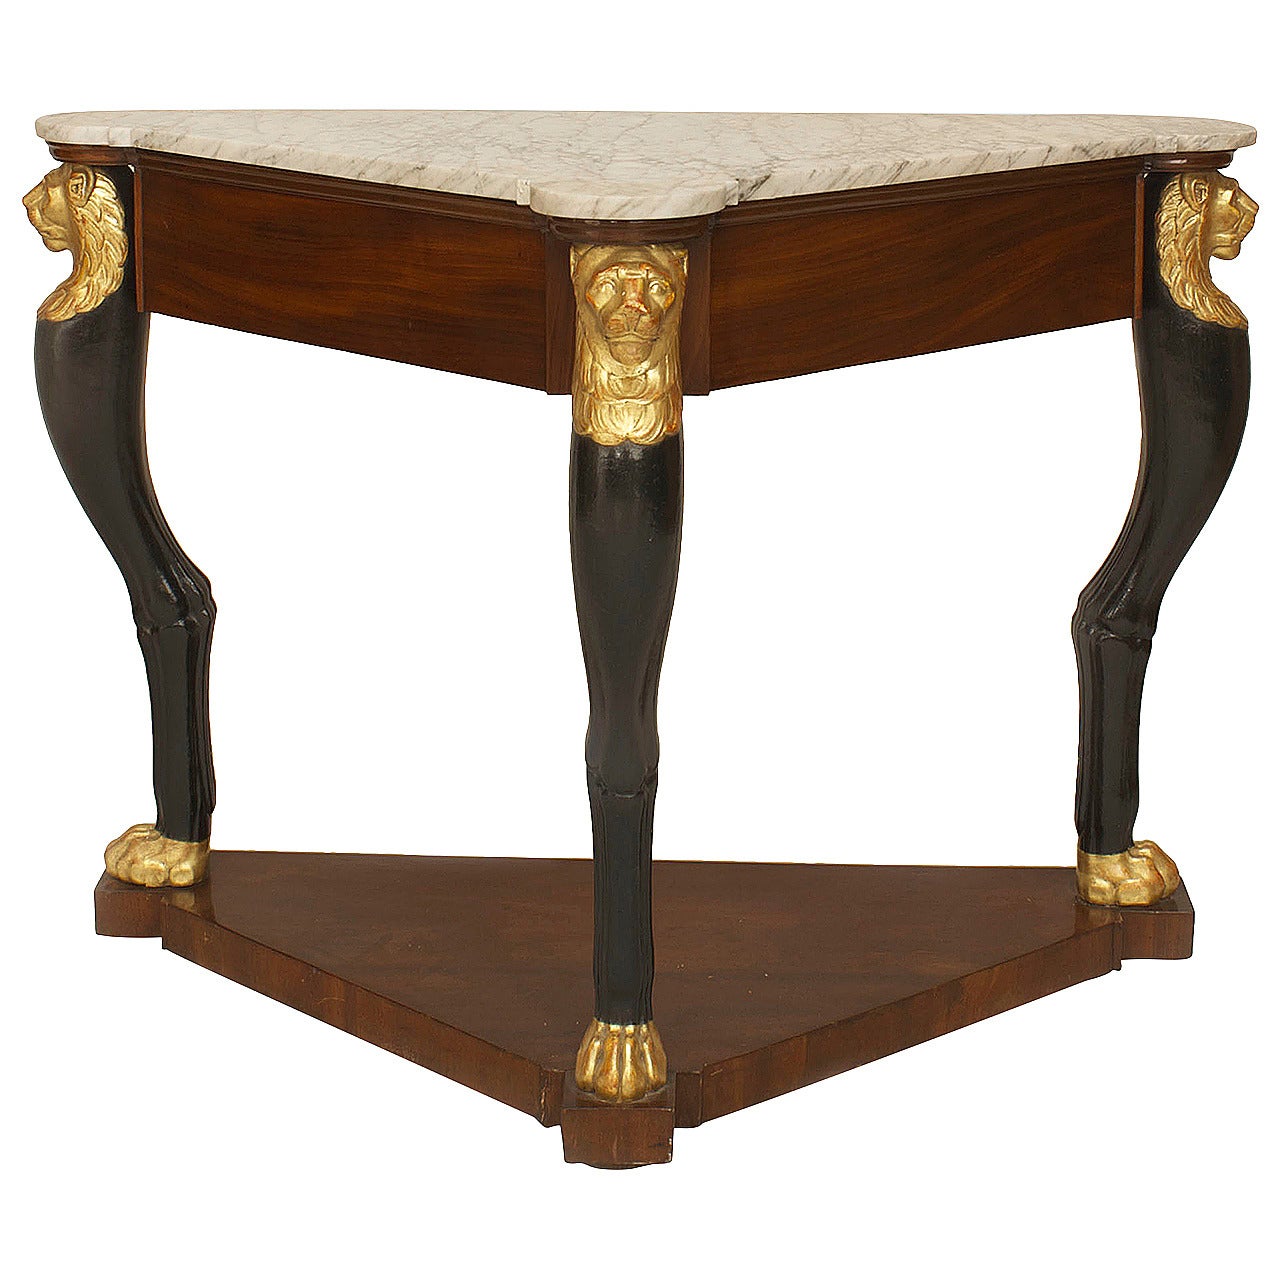 A Fine French Empire Triangular Console Table with Gilt Lion Heads